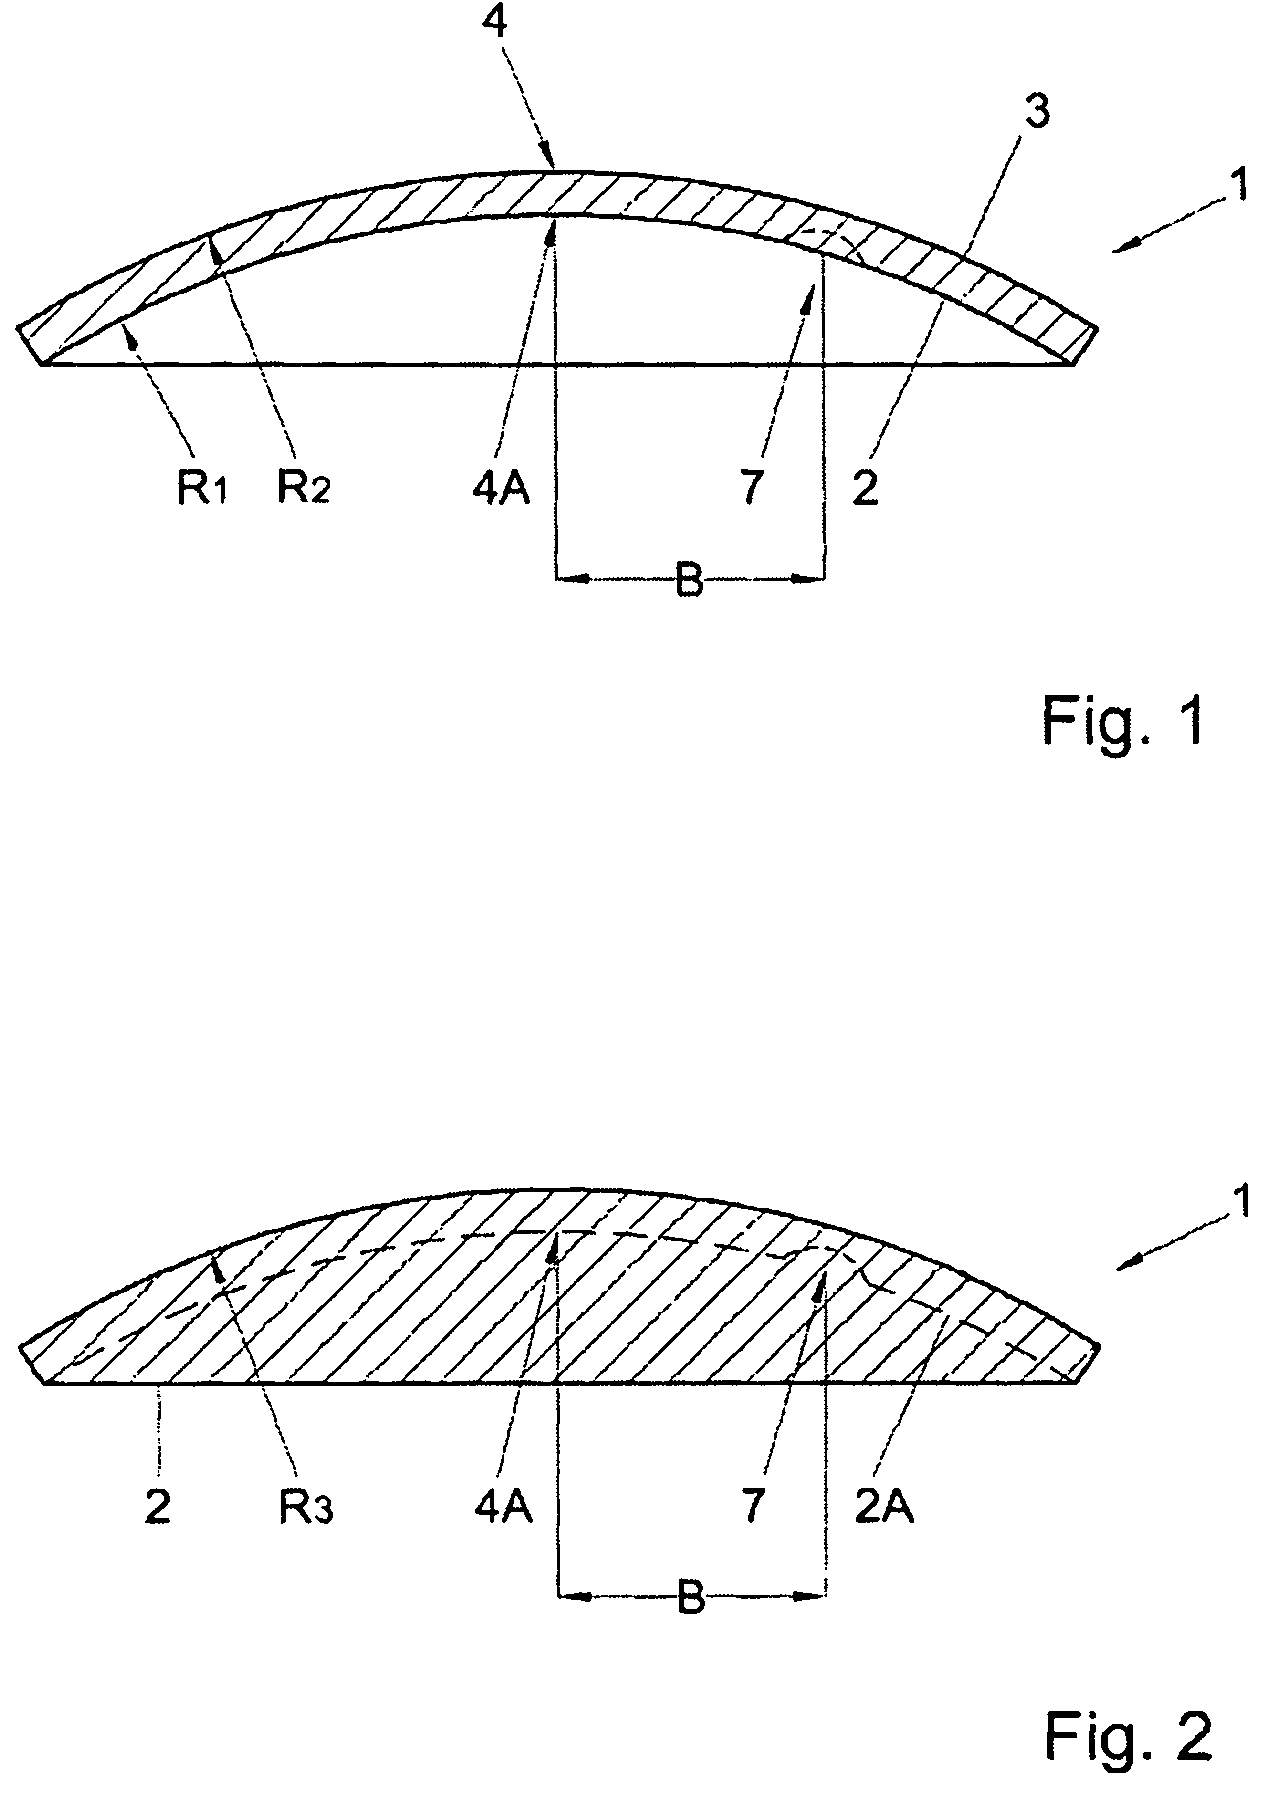 Apparatus and method for manufacturing optical objects